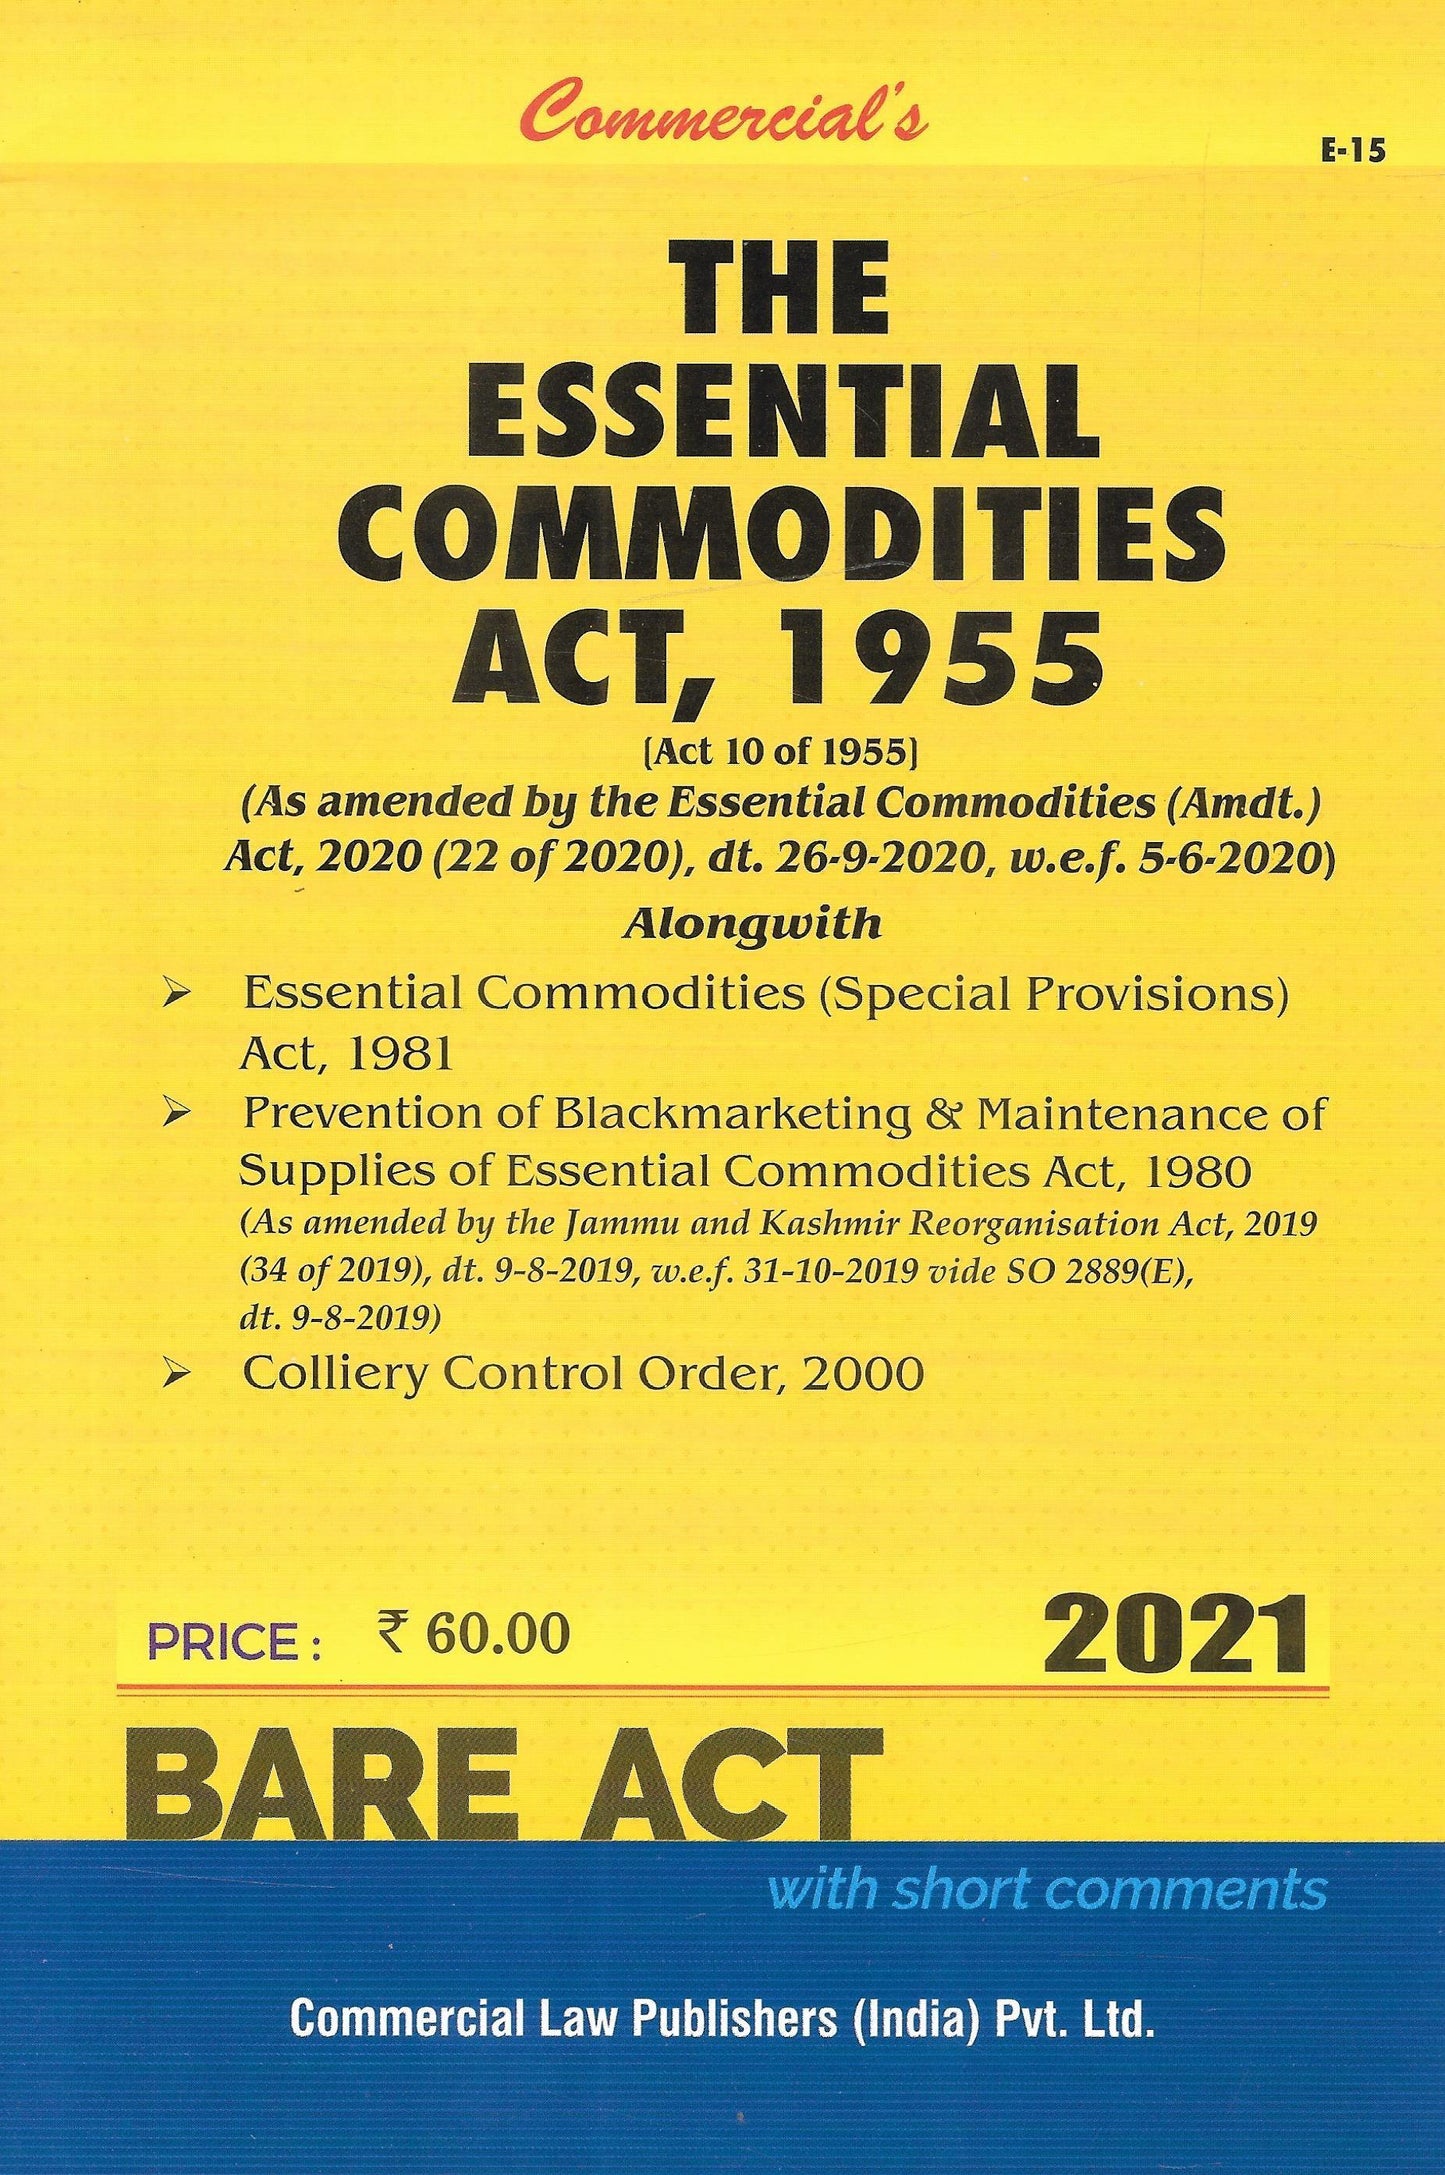 The Essential Commodities Act